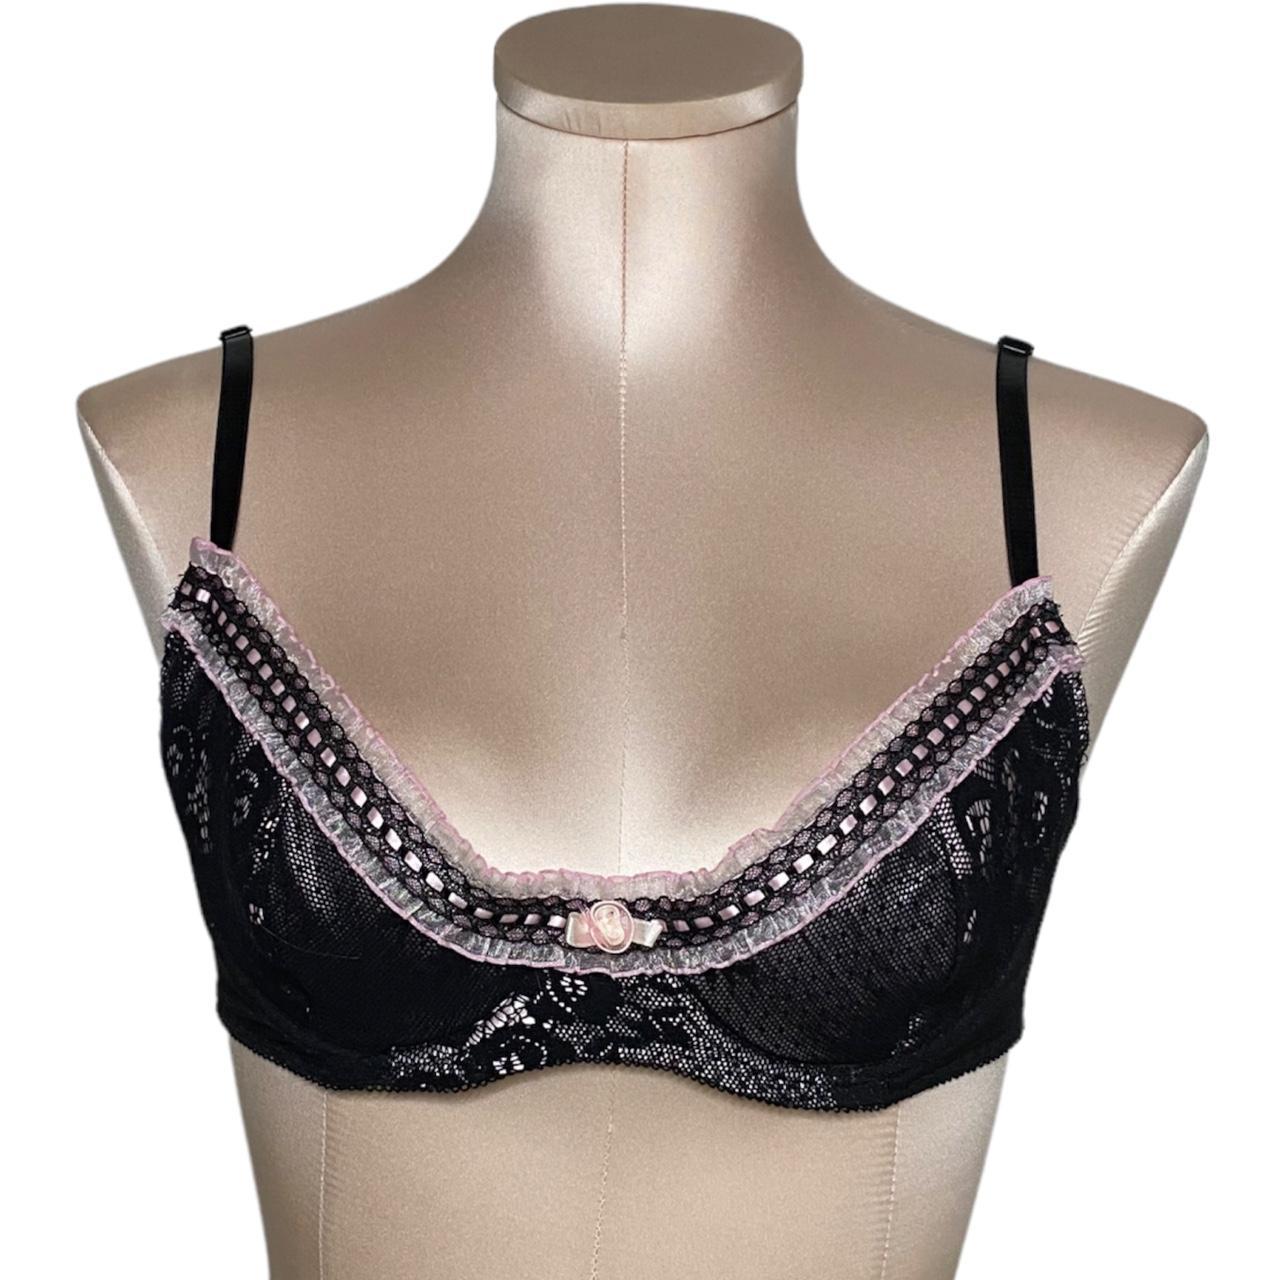 Frederick's of Hollywood Women's Black and Pink Bra